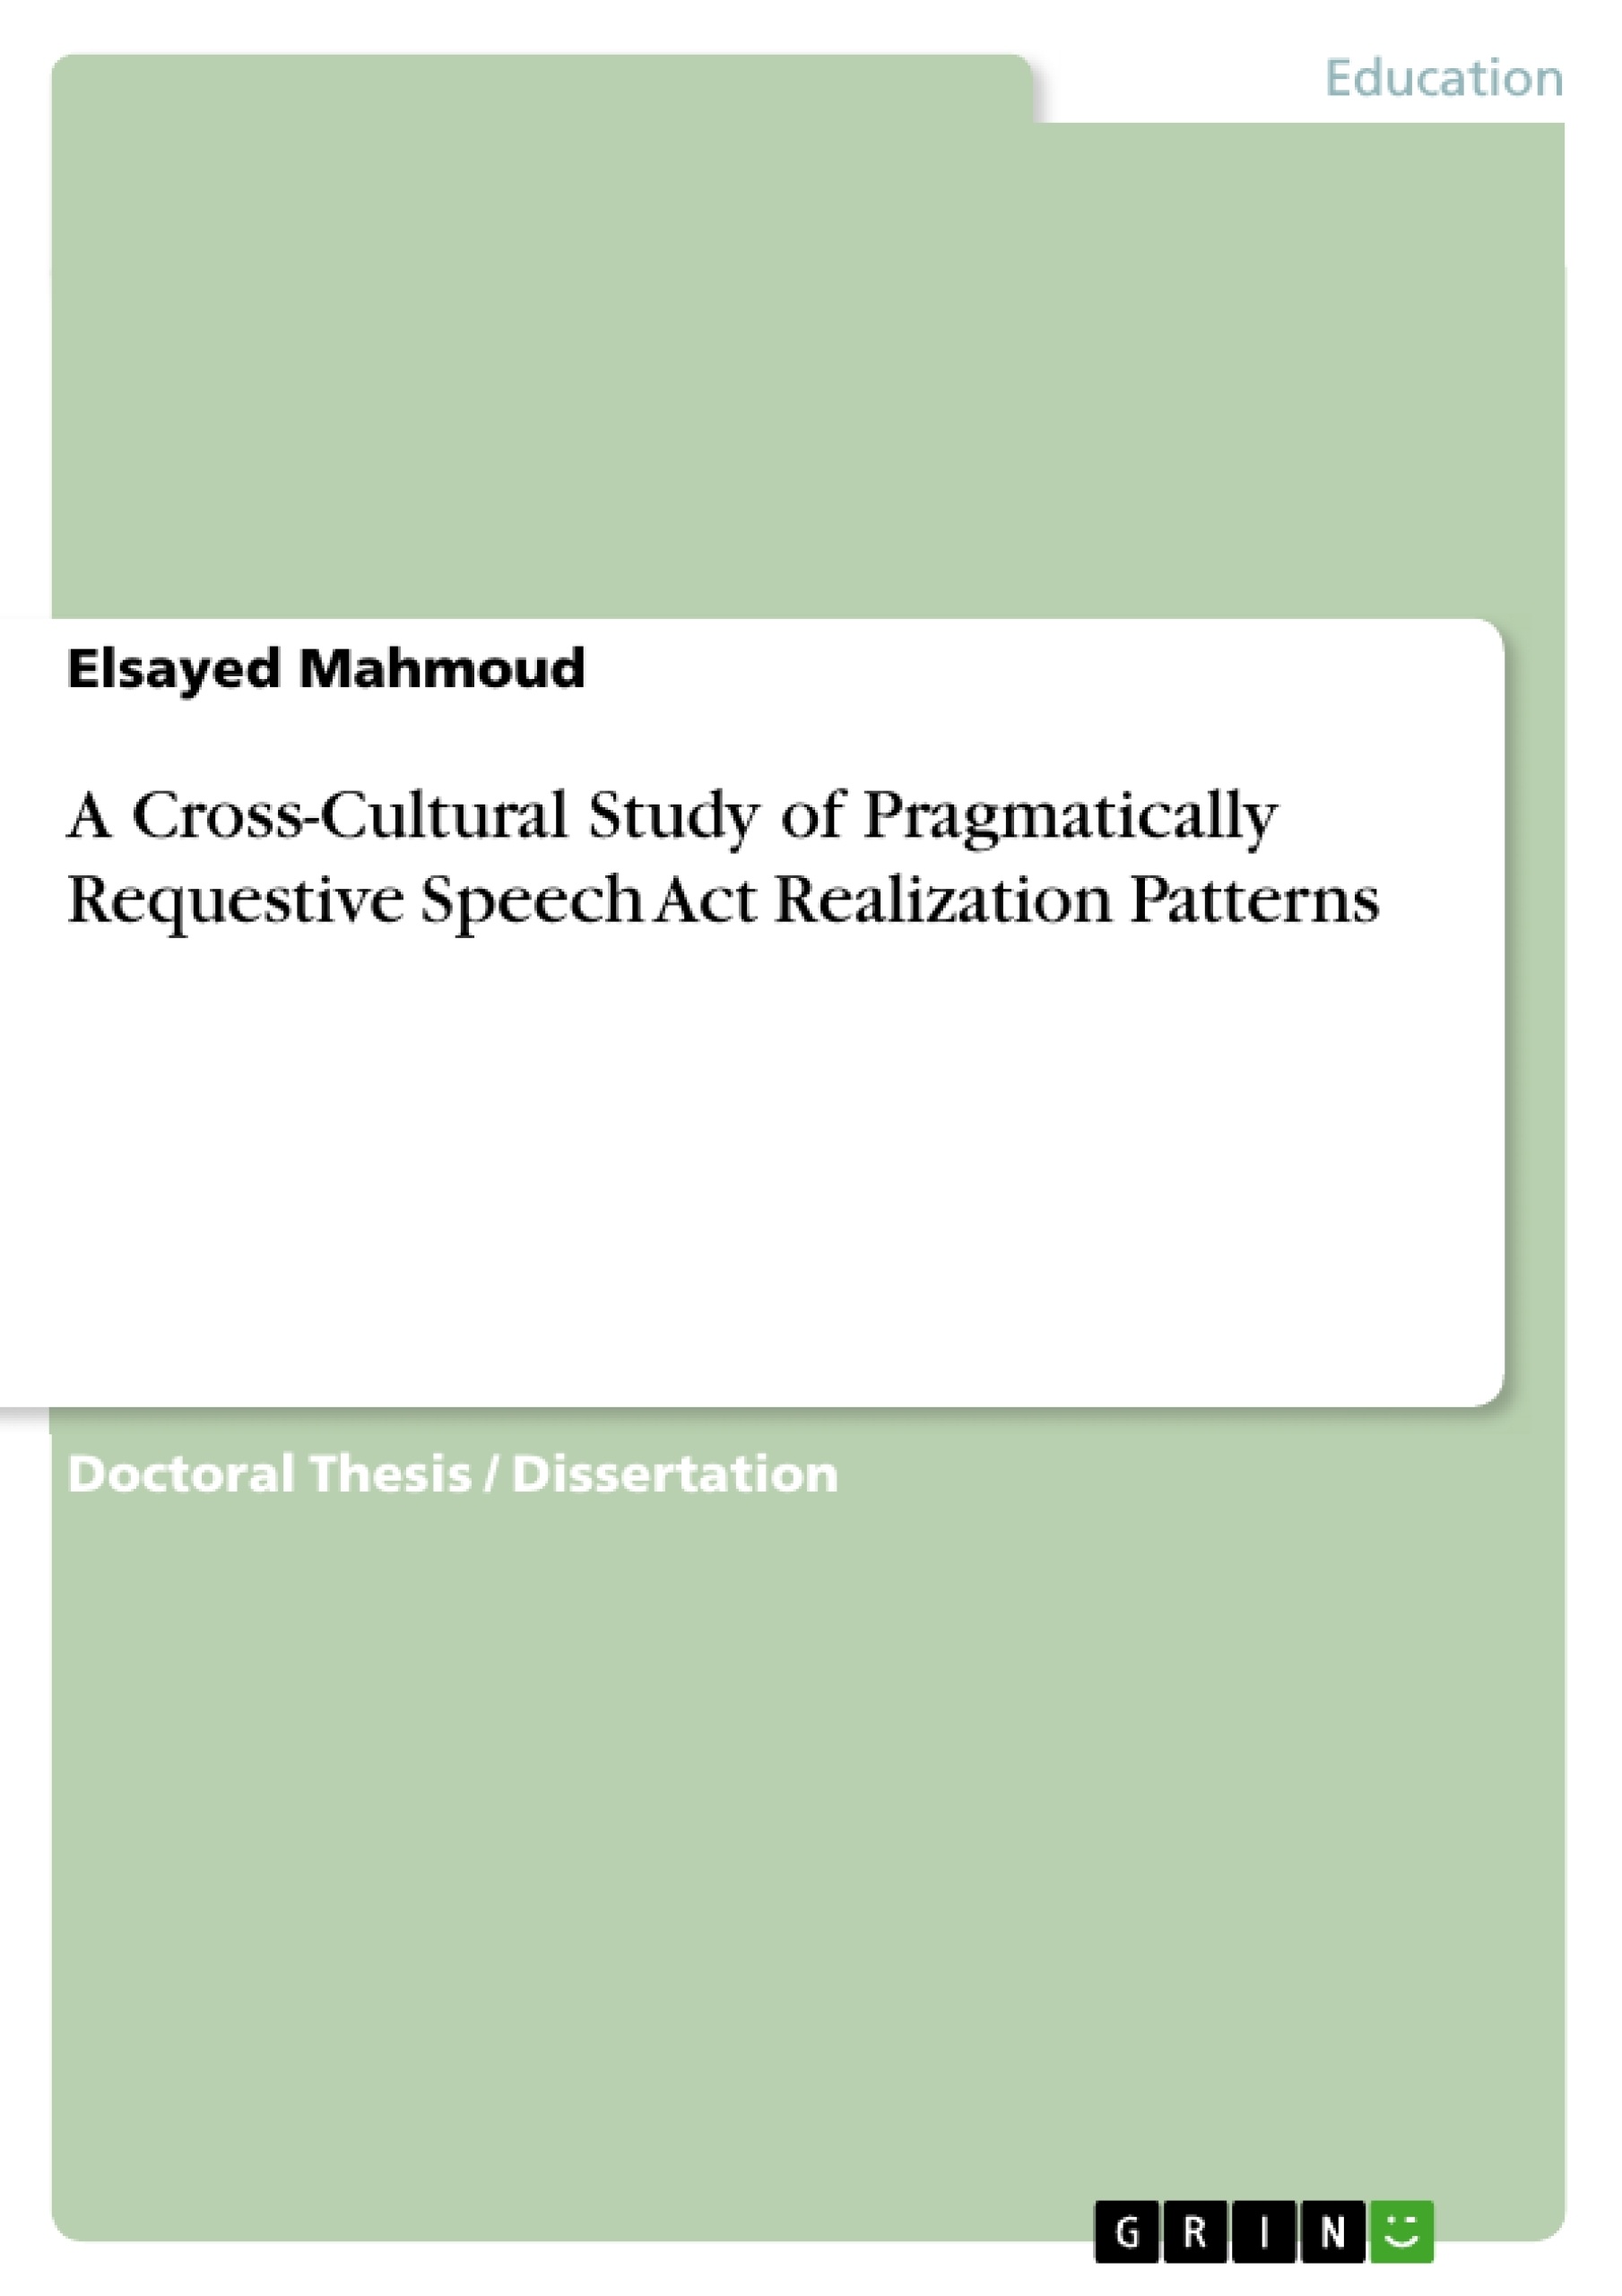 Title: A Cross-Cultural Study of Pragmatically Requestive Speech Act Realization Patterns